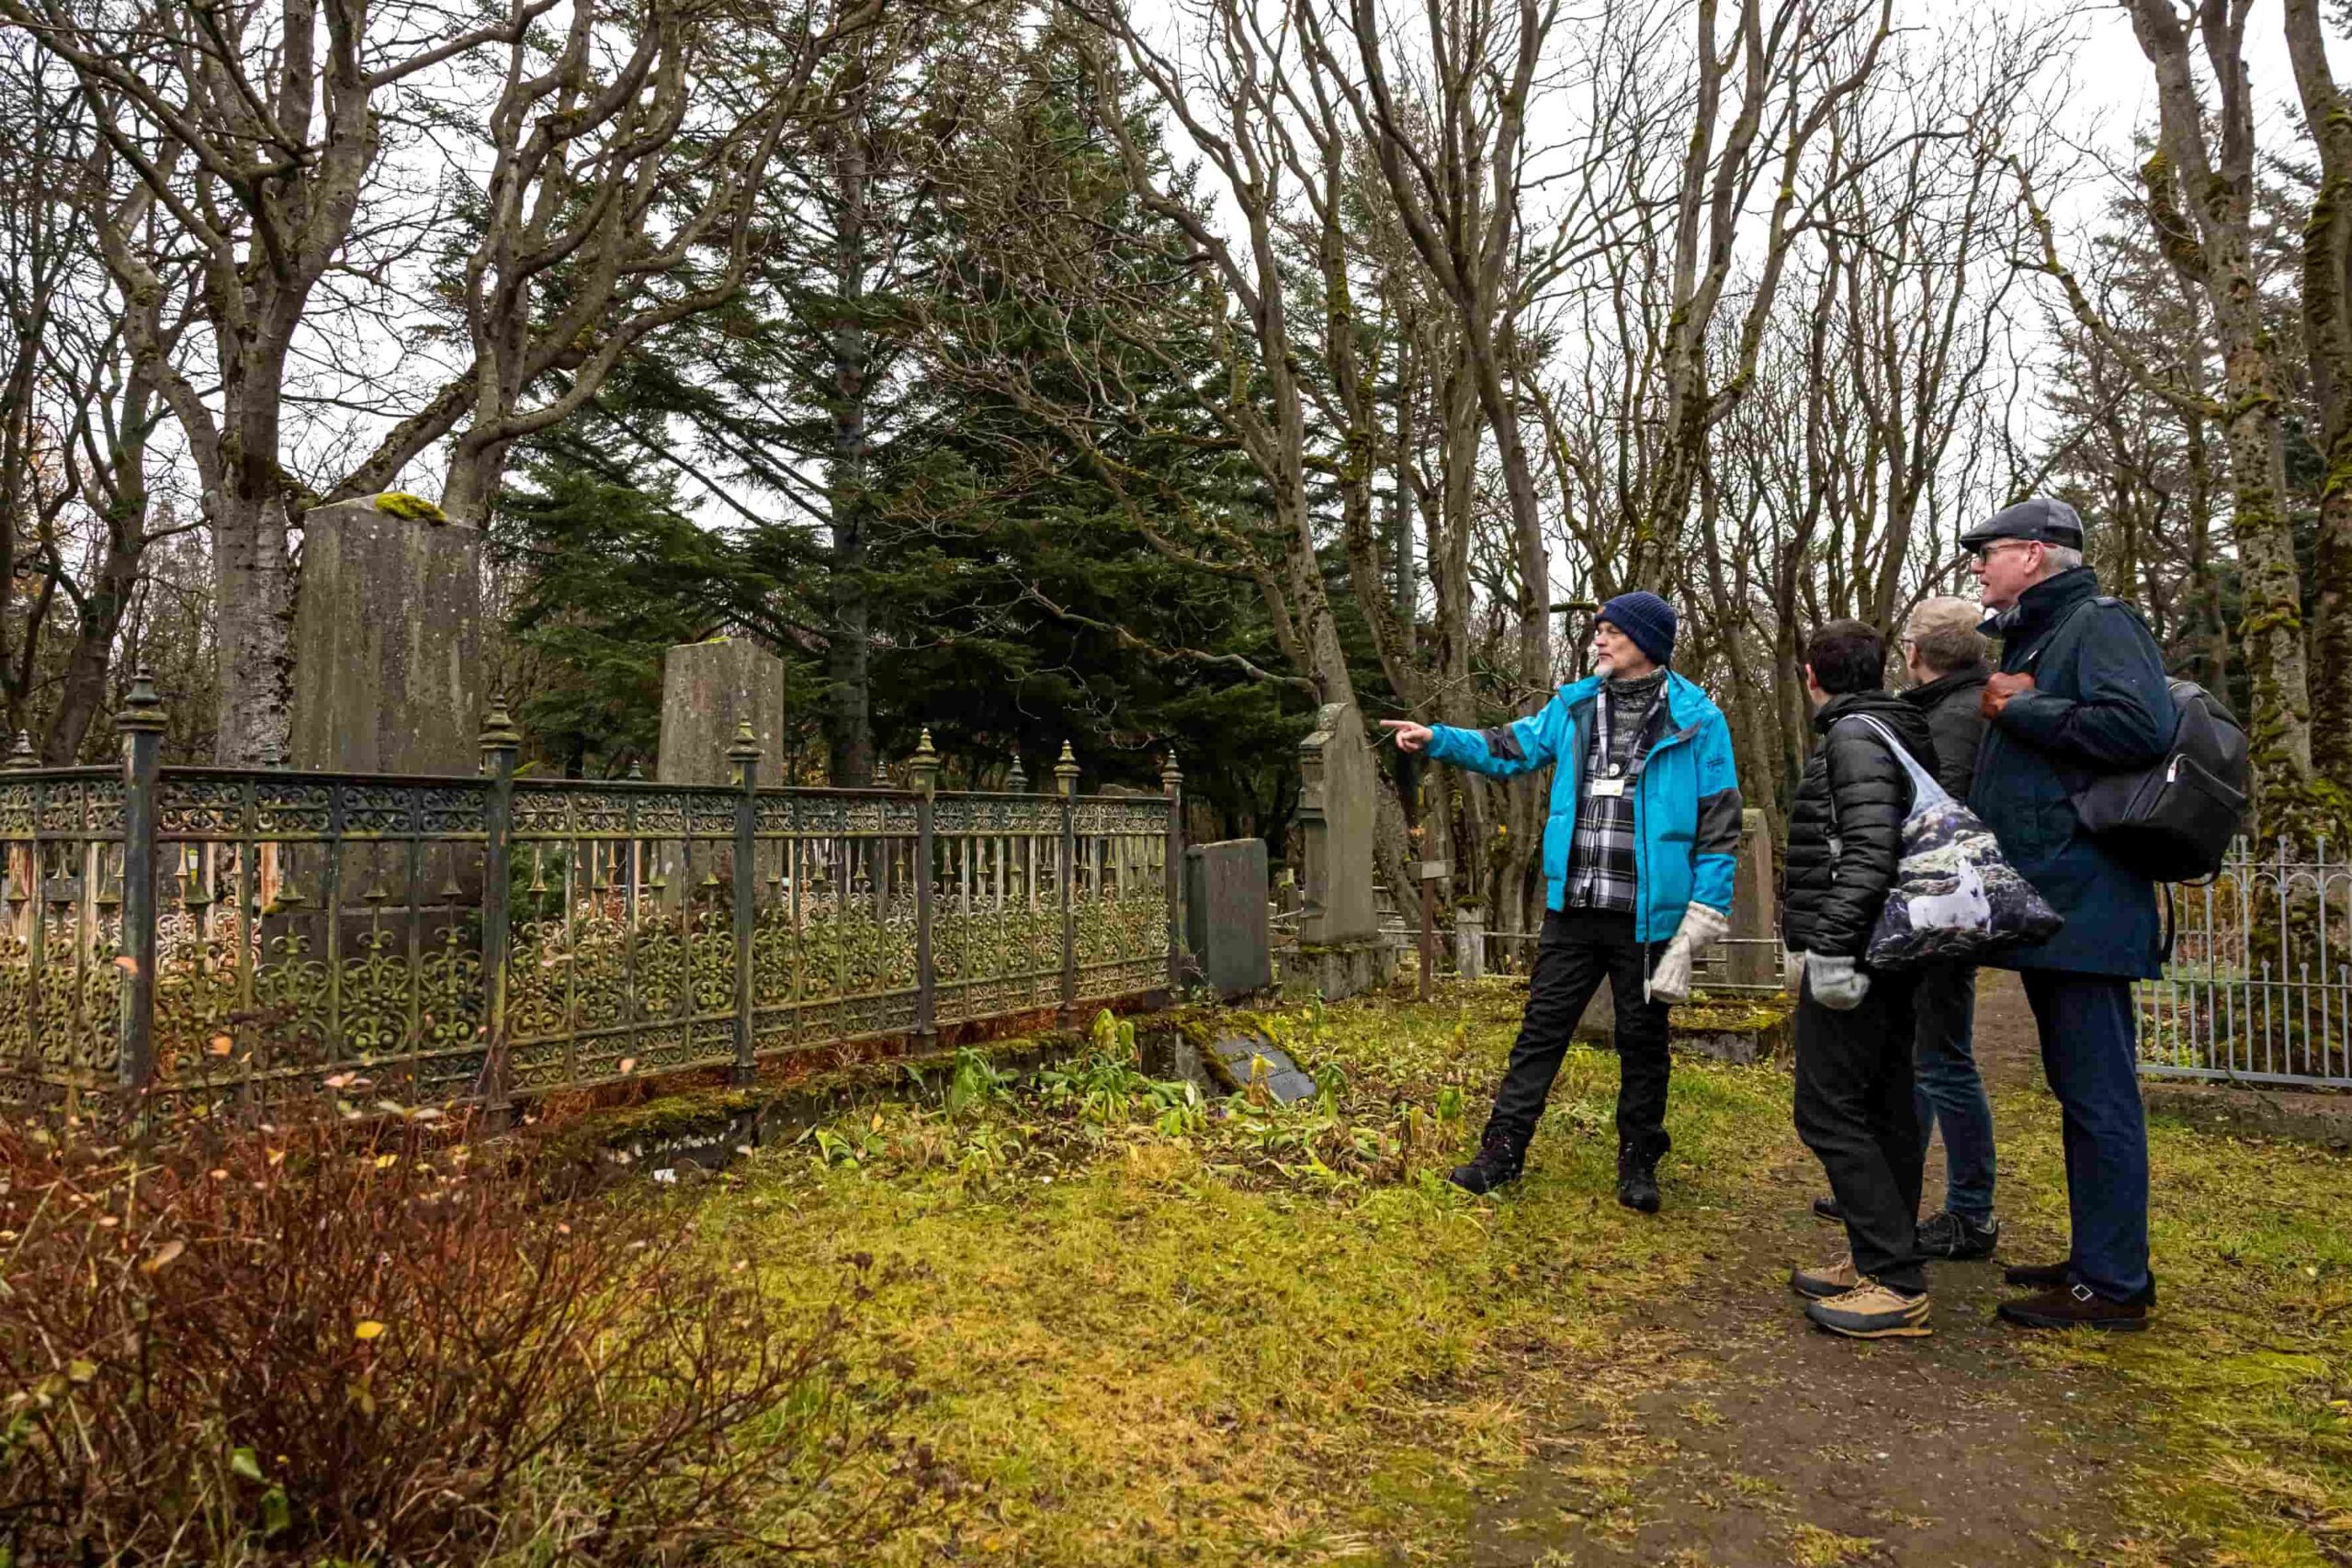 A guide from Your Friend in Reykjavik is sharing the story behind the people buried in the grave on the picture.